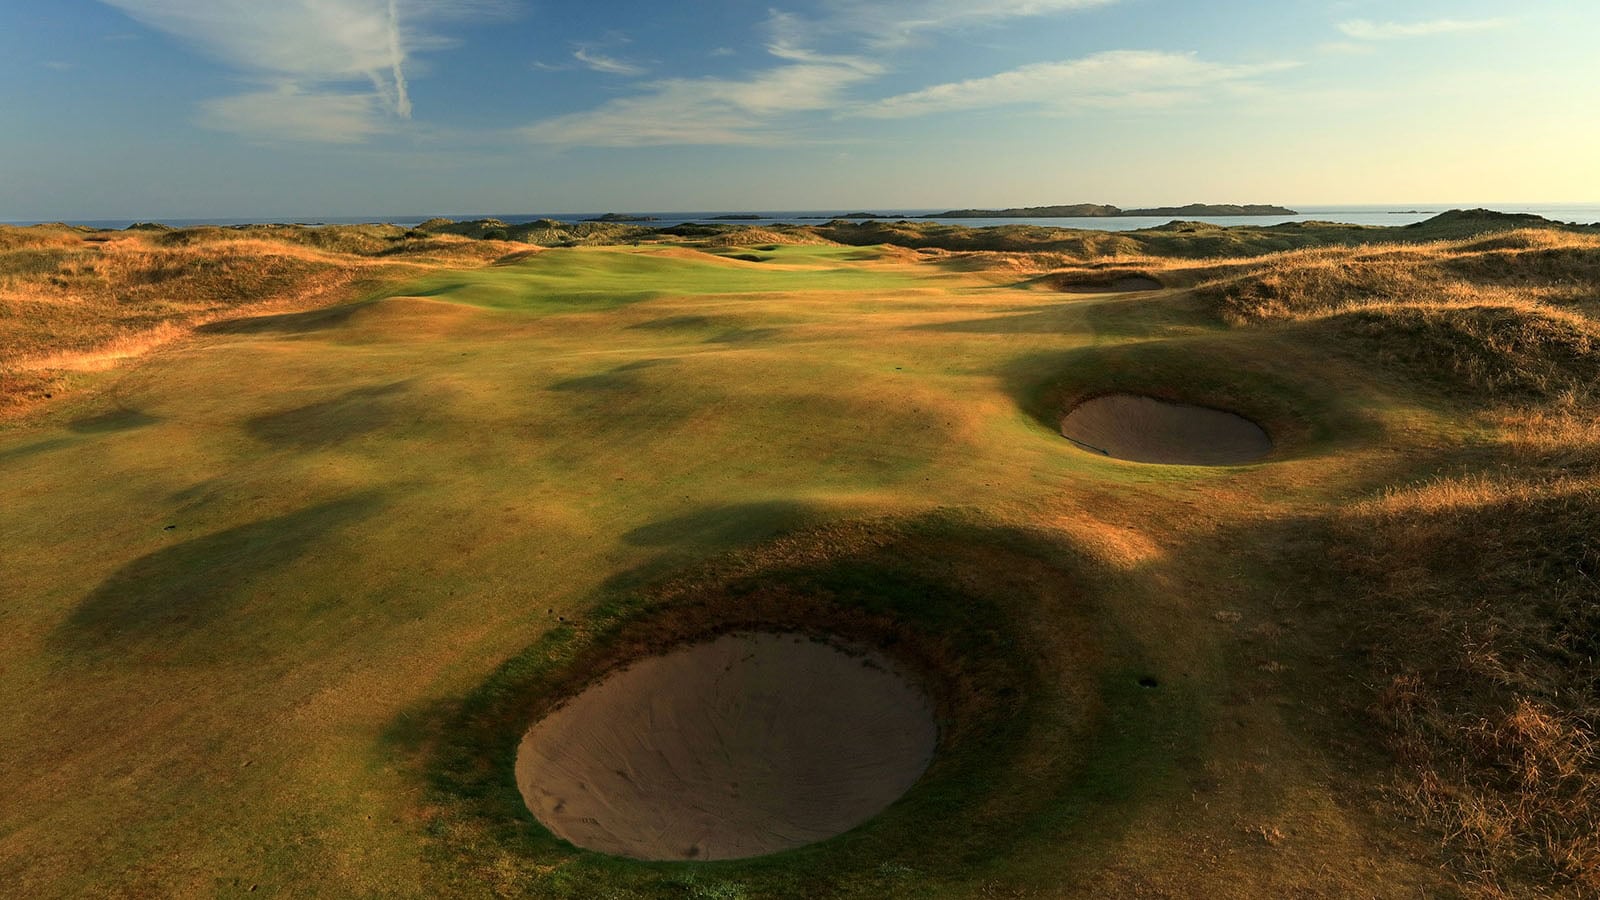 Aerial view of the 2nd green and deep pot bunkers with long shadows at Royal Portrush Dunluce Golf Course, Portrush, County Antrim, Northern Ireland